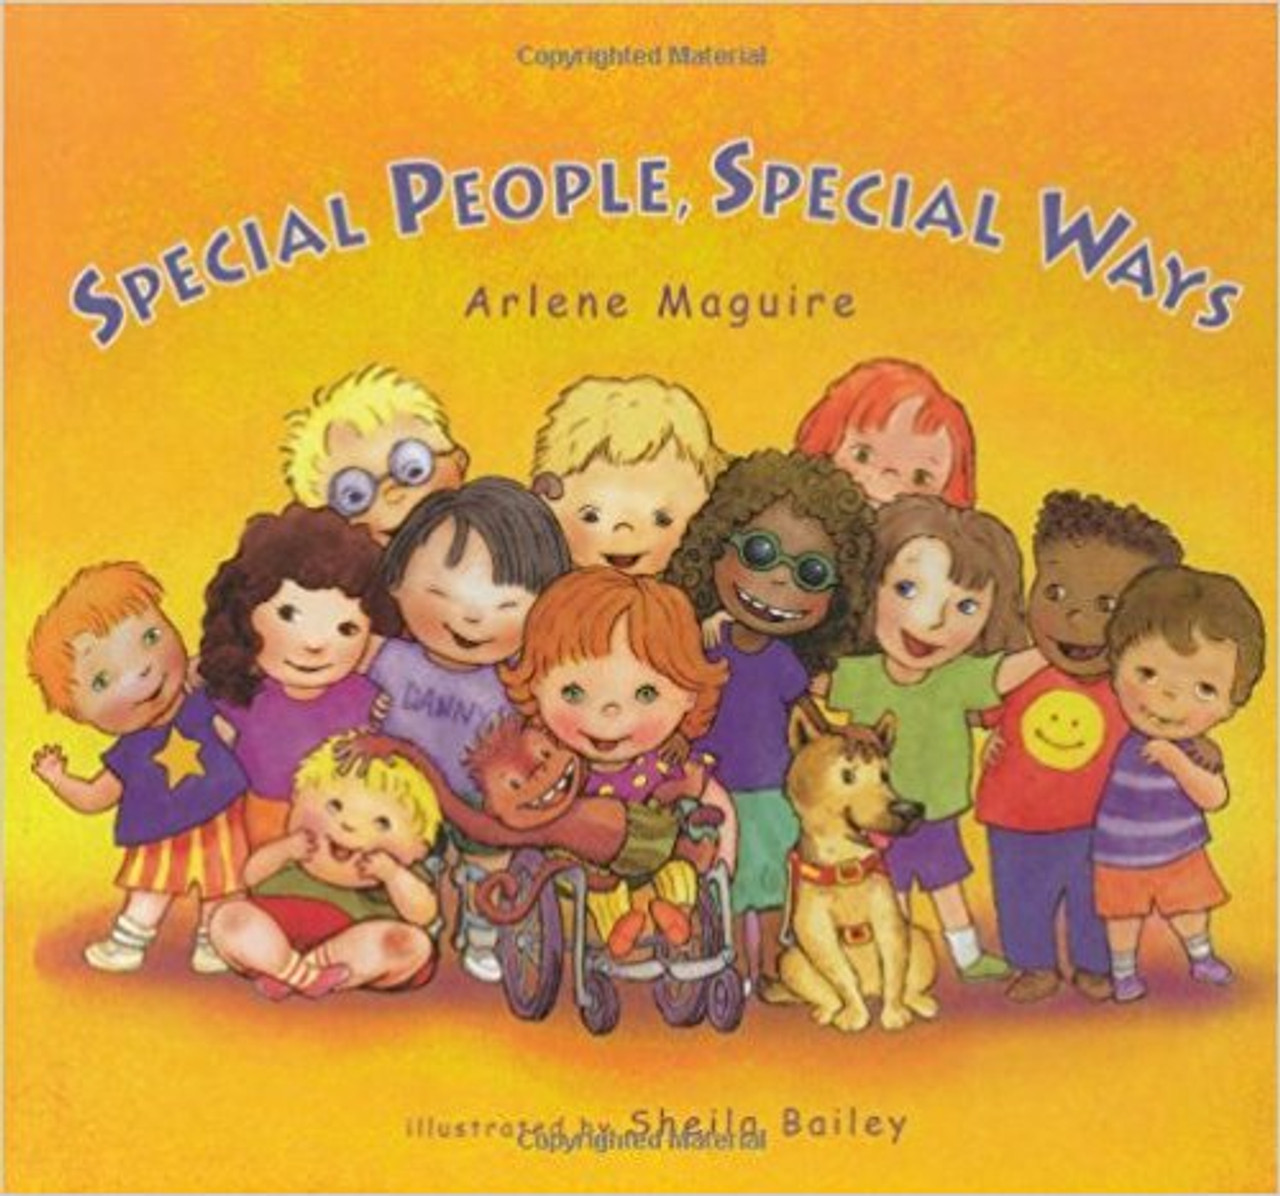 Special People, Special Ways by Arlene Maguire